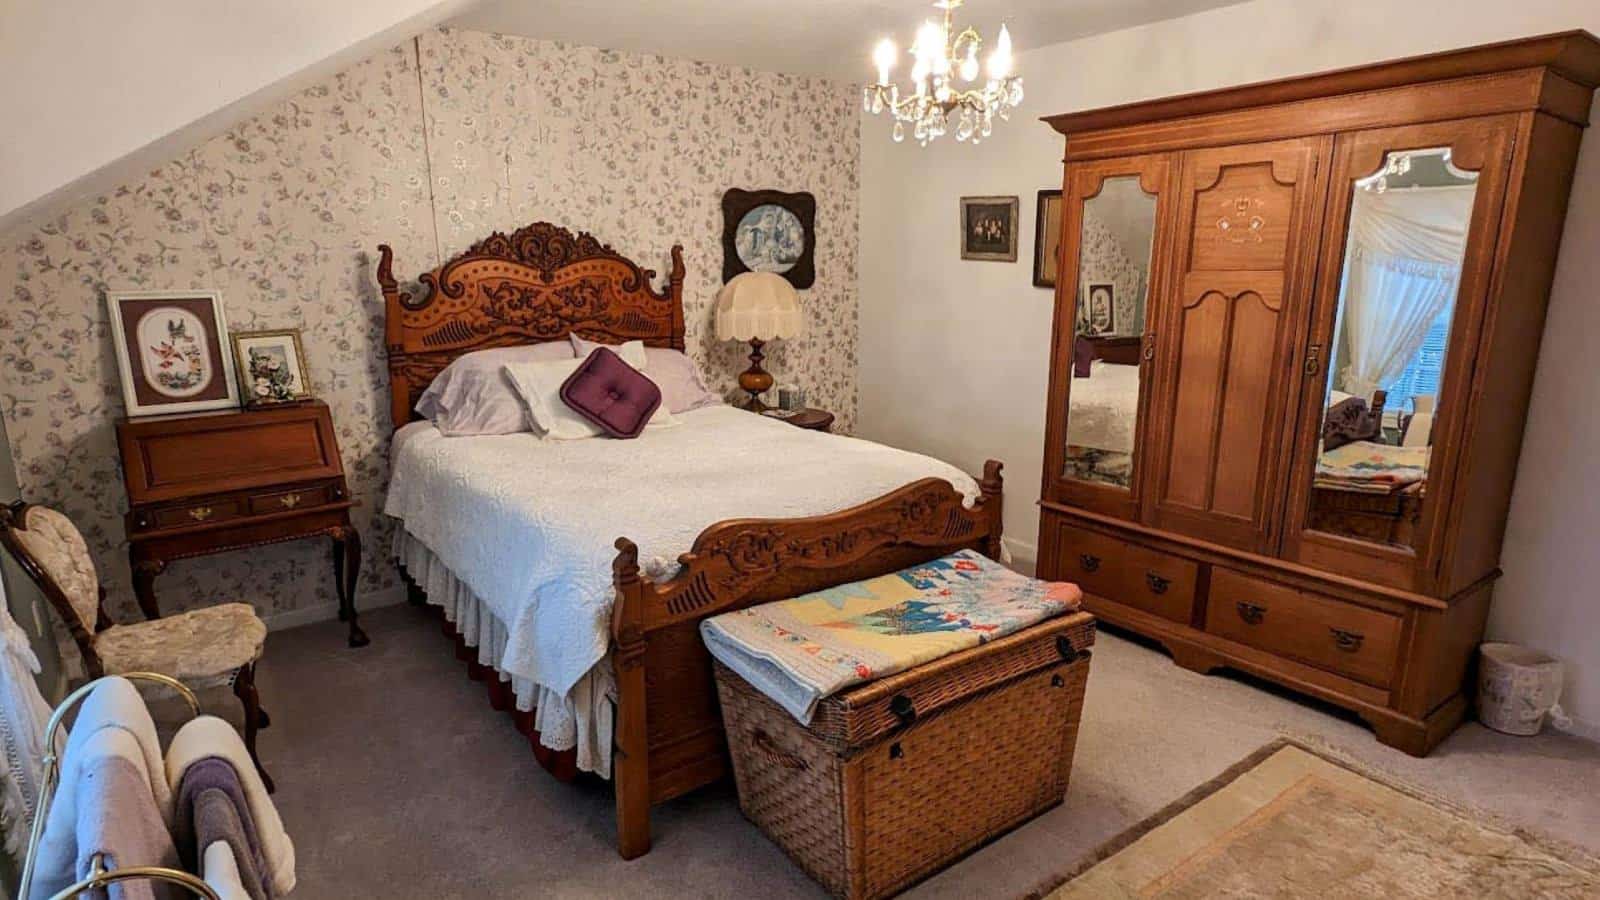 Bedroom with white walls, floral wallpaper, carpeting, wooden antique headboard and foot board with white bedding, and large wooden armoire with mirrors